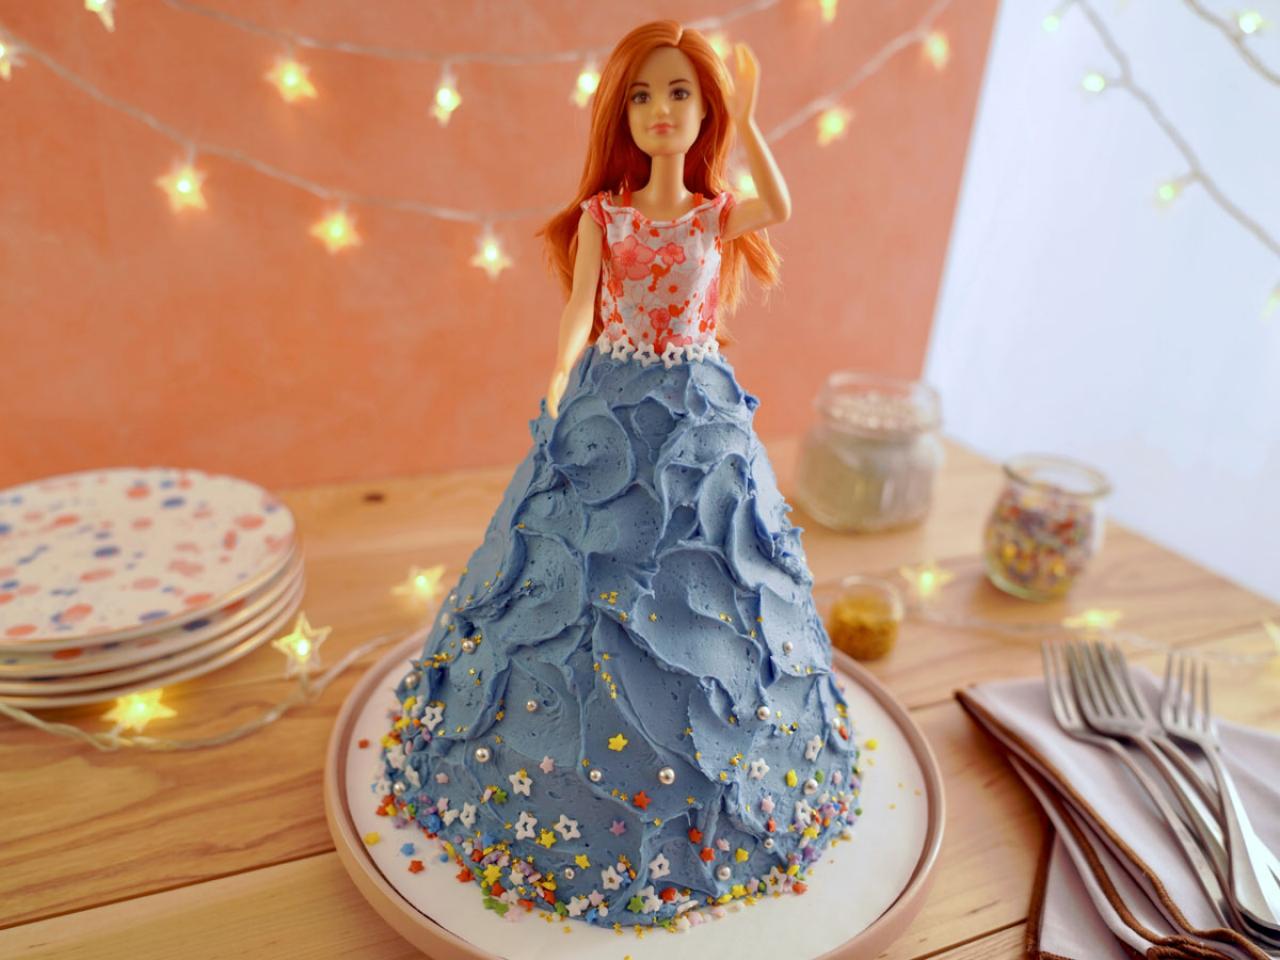 How to make a Doll Cake | Doll Cake | Princess Cake ~ Full Scoops - A food  blog with easy,simple & tasty recipes!